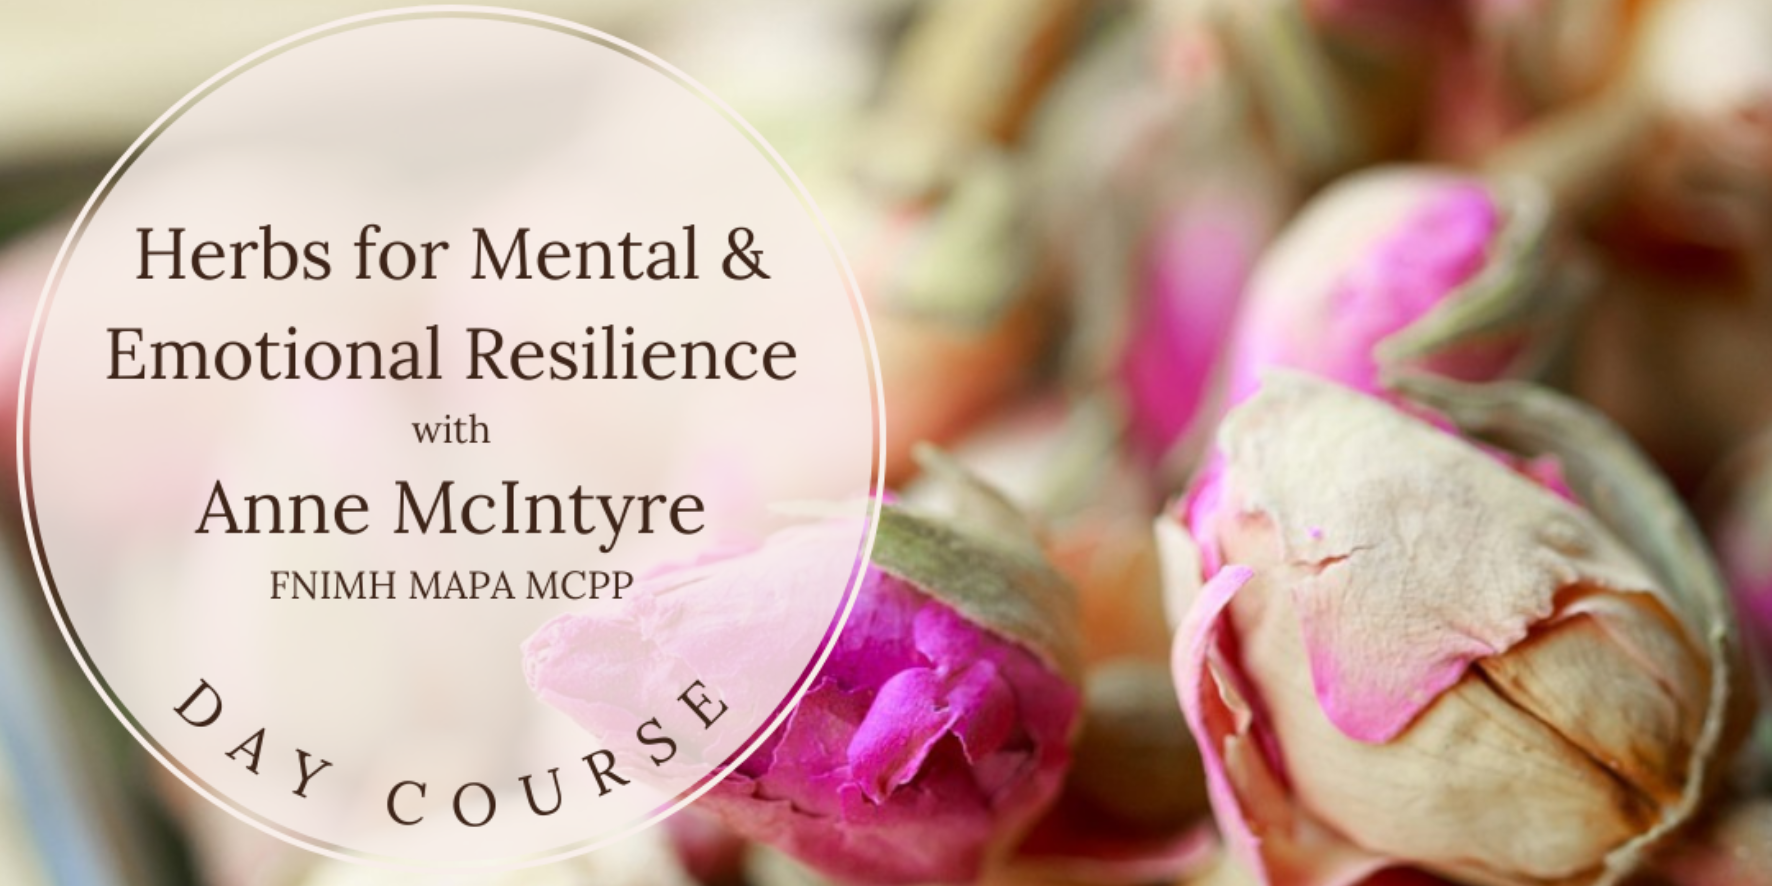 Herbs for Mental and Emotional Resilience with Anne McIntyre